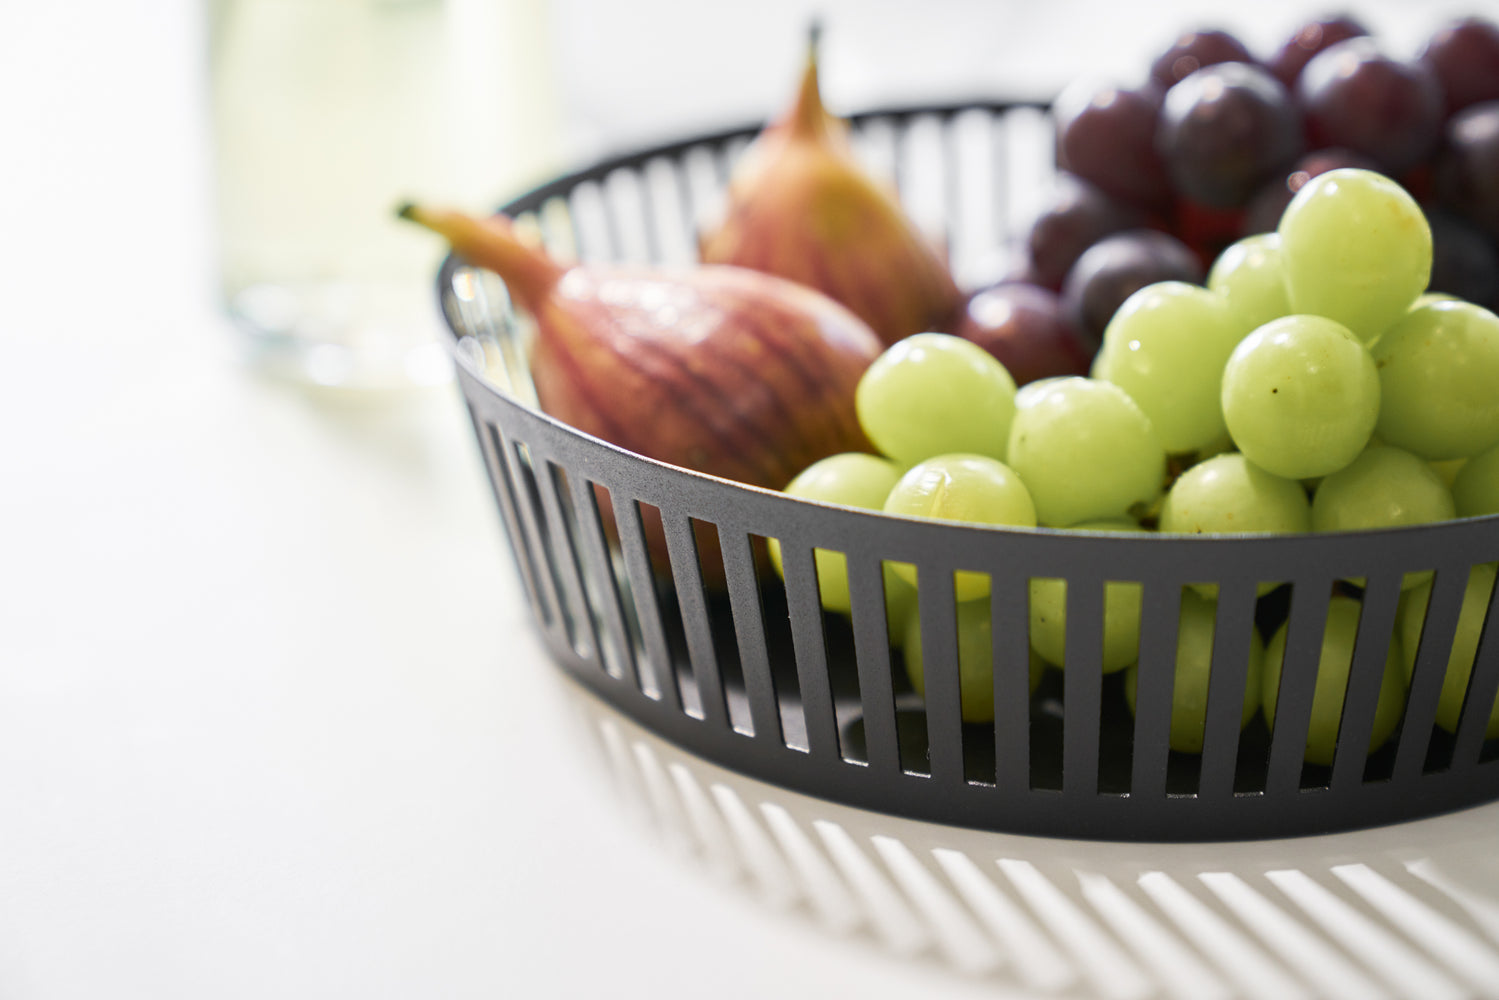 View 8 - Close up view of black Fruit Basket holding grapes and figs on white tabletop by Yamazaki Home.